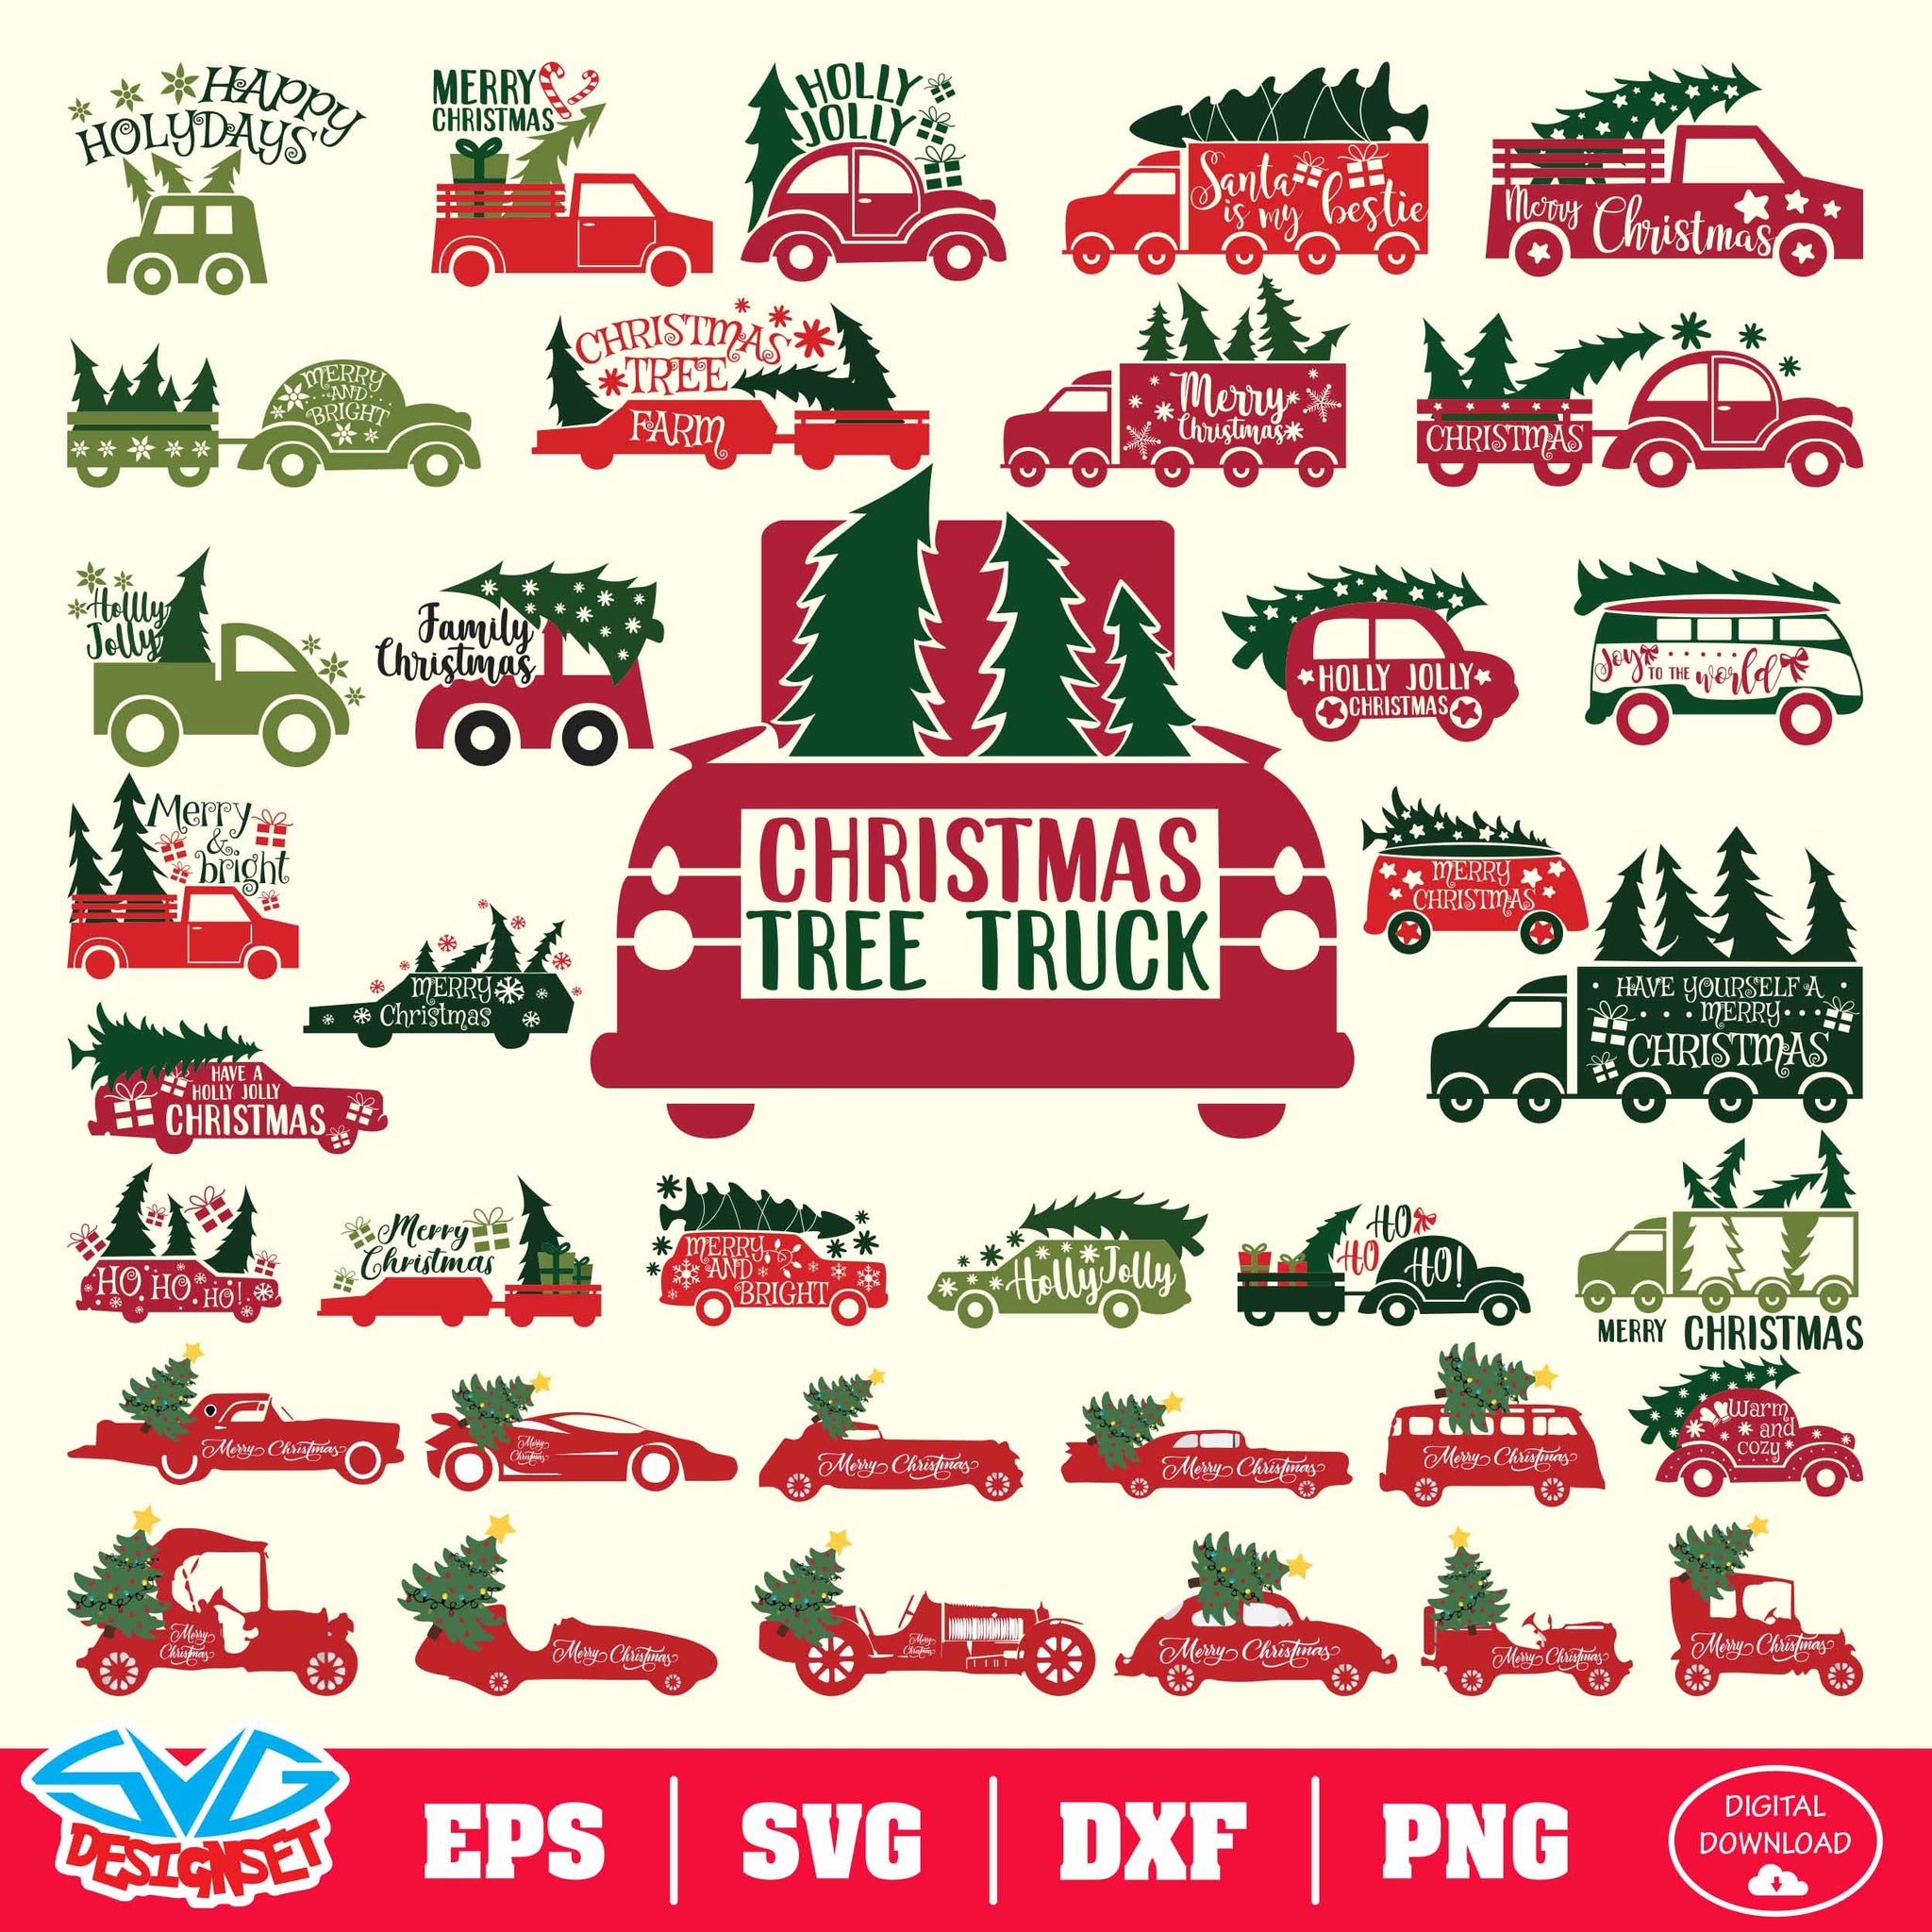 Christmas Car Bundle Svg, Dxf, Eps, Png, Clipart, Silhouette and Cutfiles #002 - SVGDesignSets